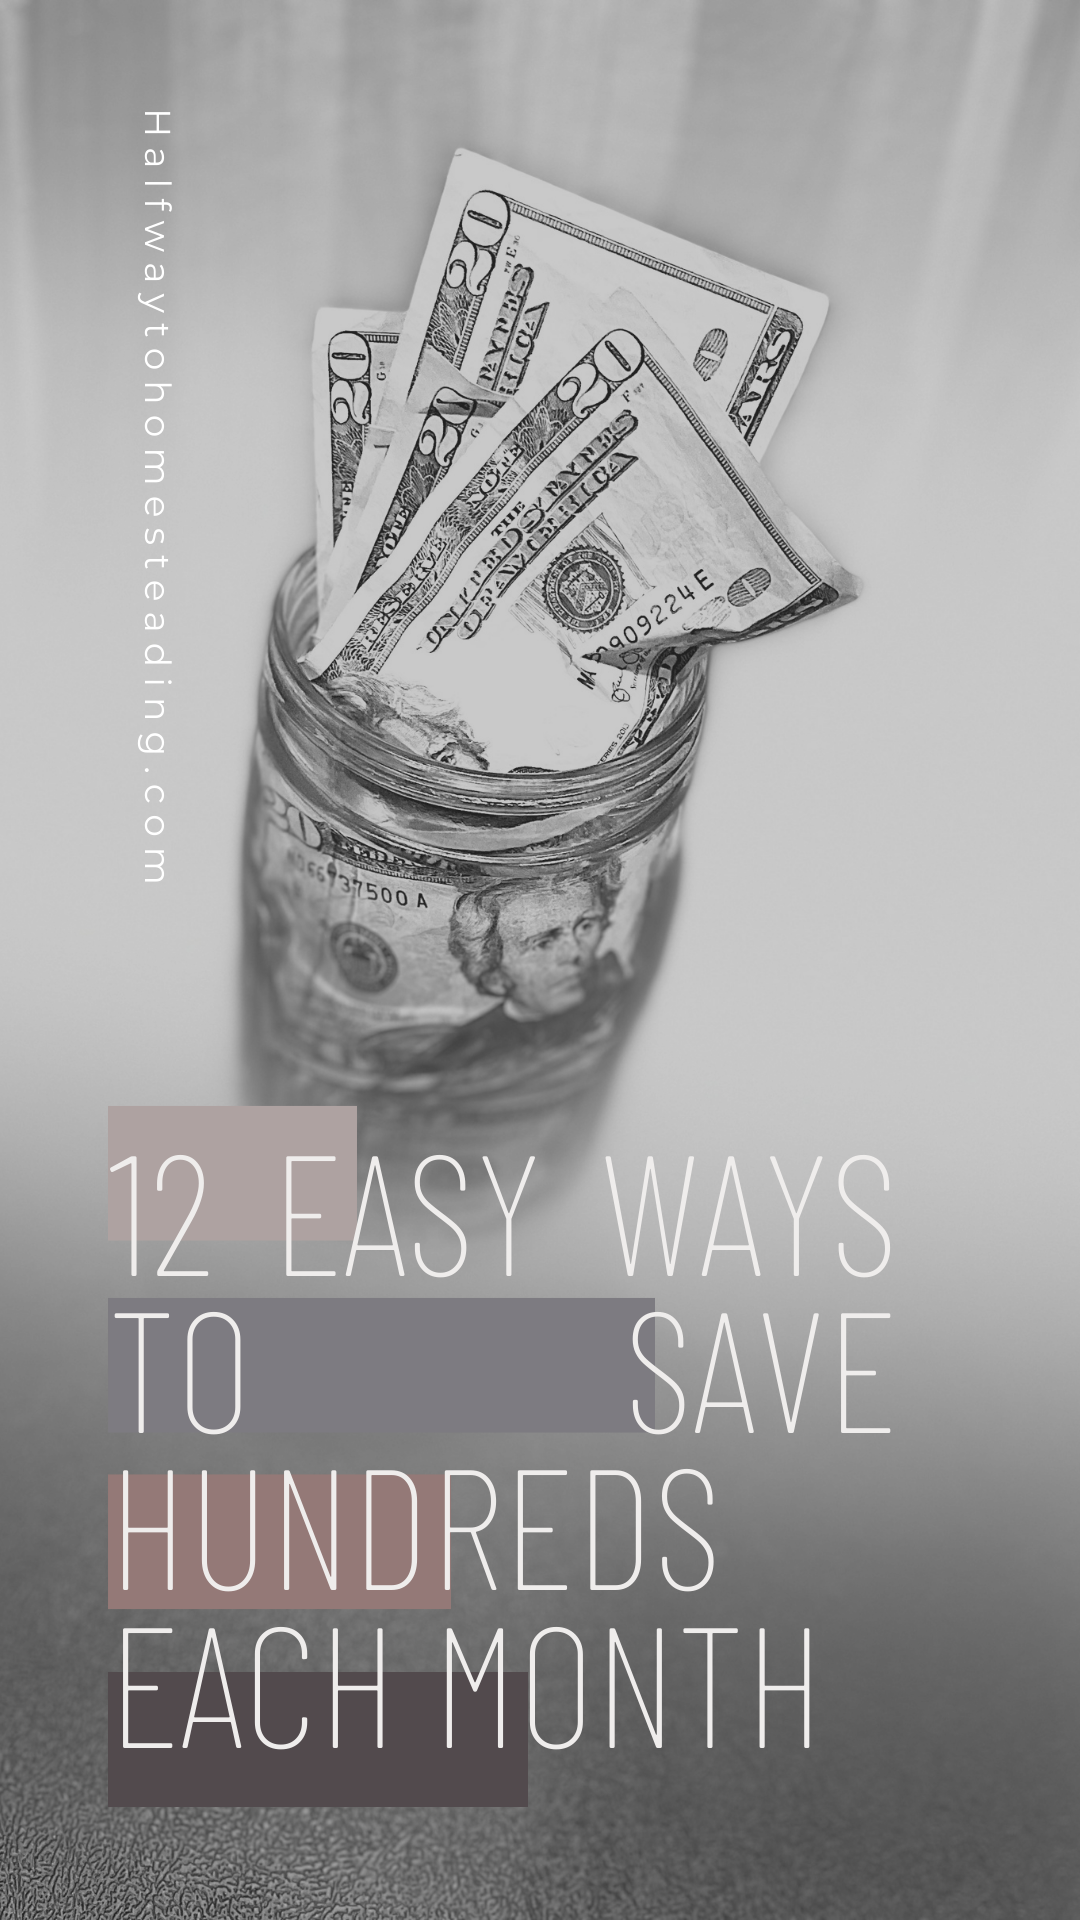 12 Easy Ways To Save Hundreds Each Month